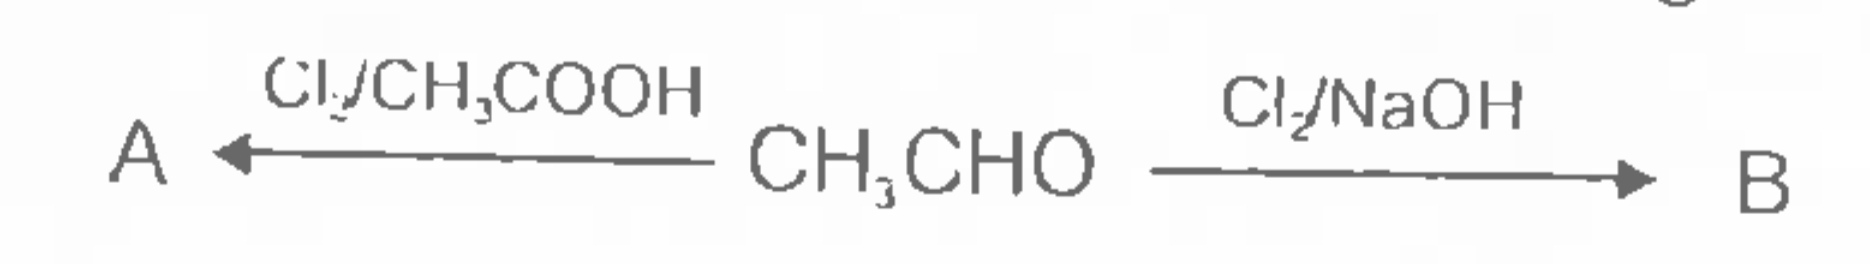 Identify products A and B in the following reaction